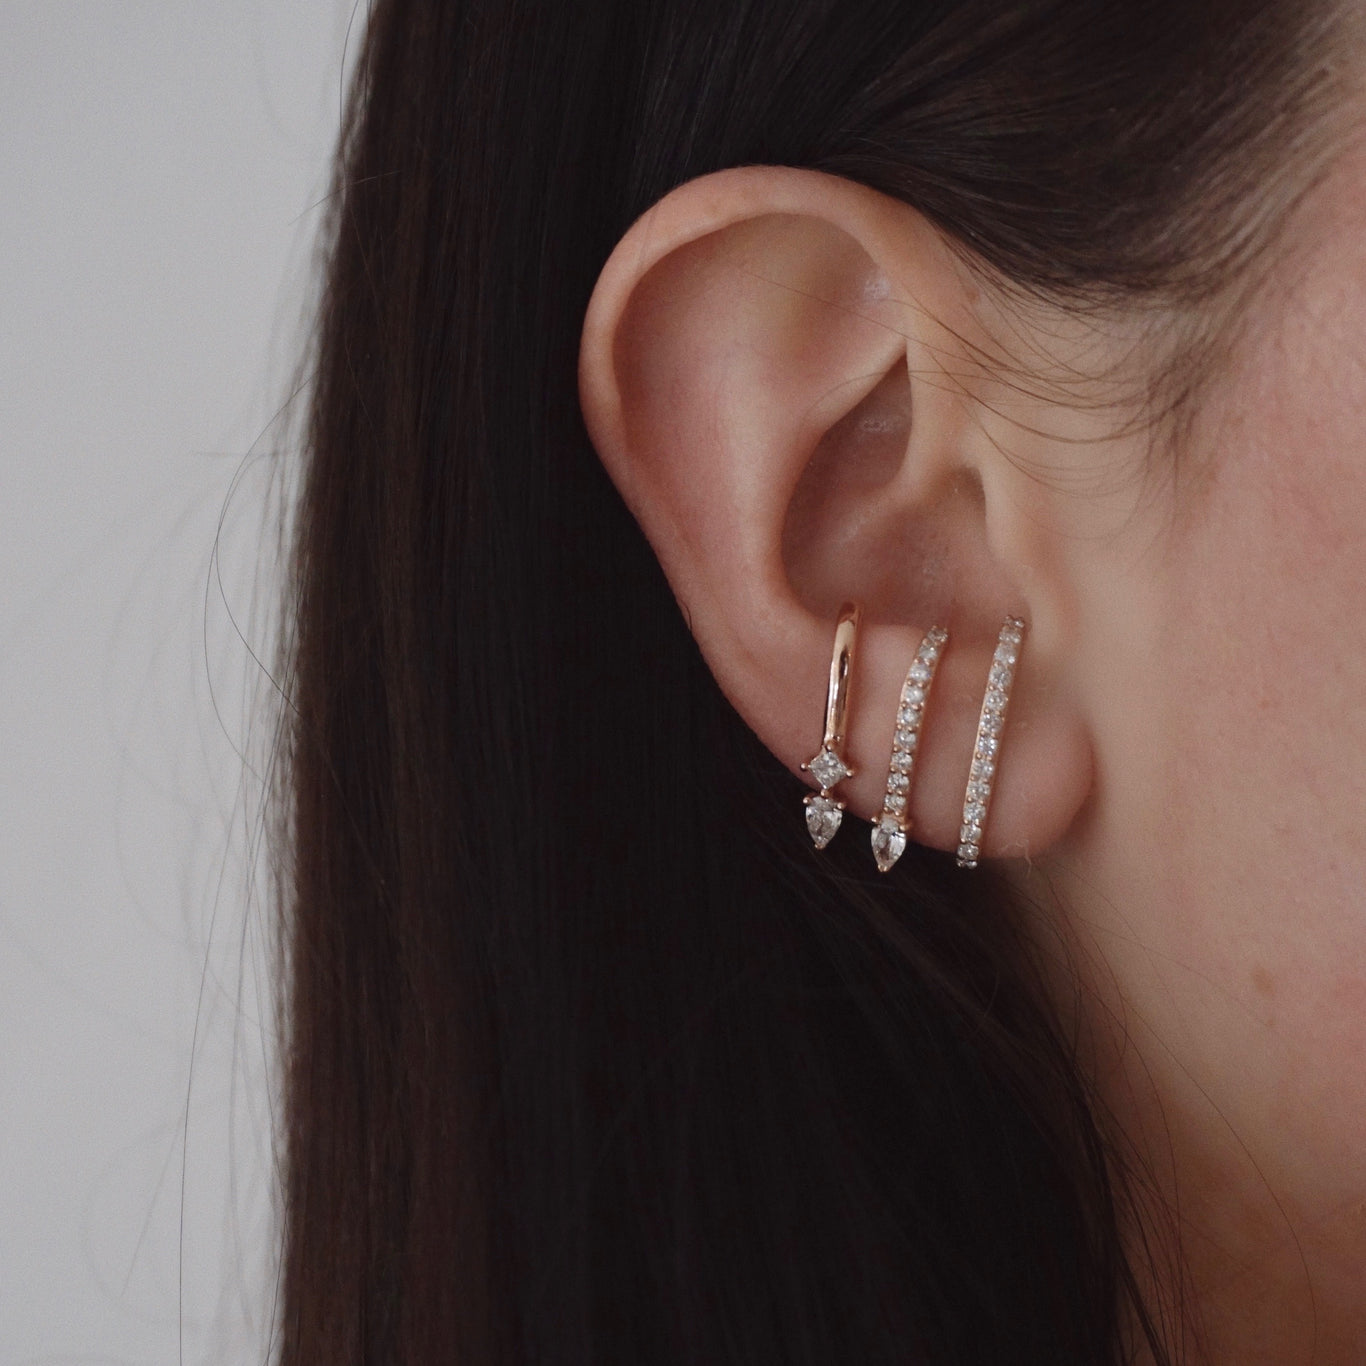 Stiletto Lobe Earring shown with the Pear Lobe Earring and Superhuggy